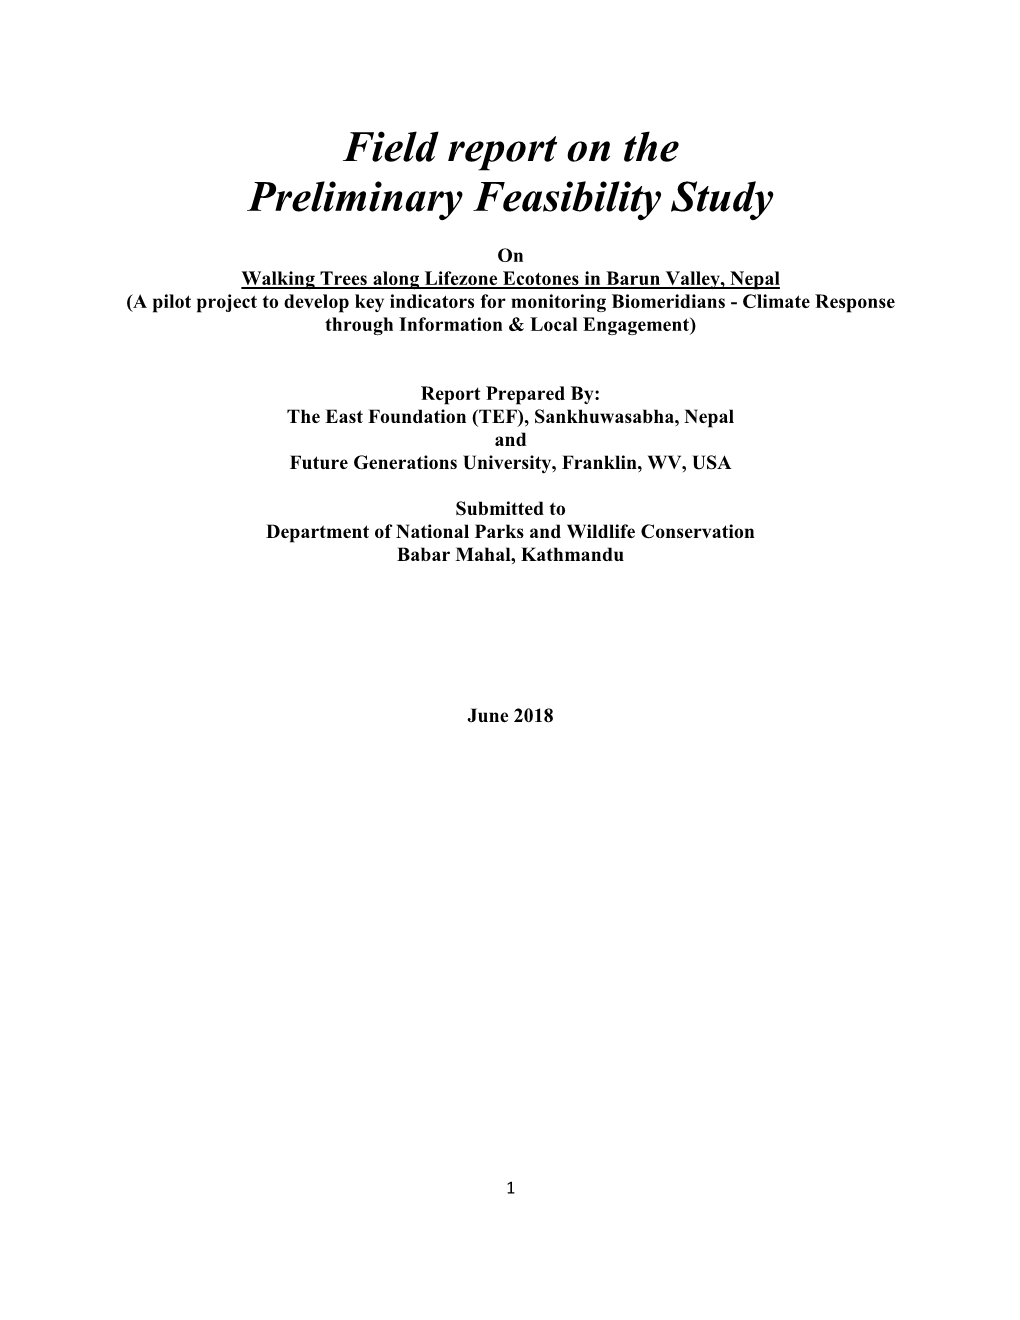 Field Report on the Preliminary Feasibility Study